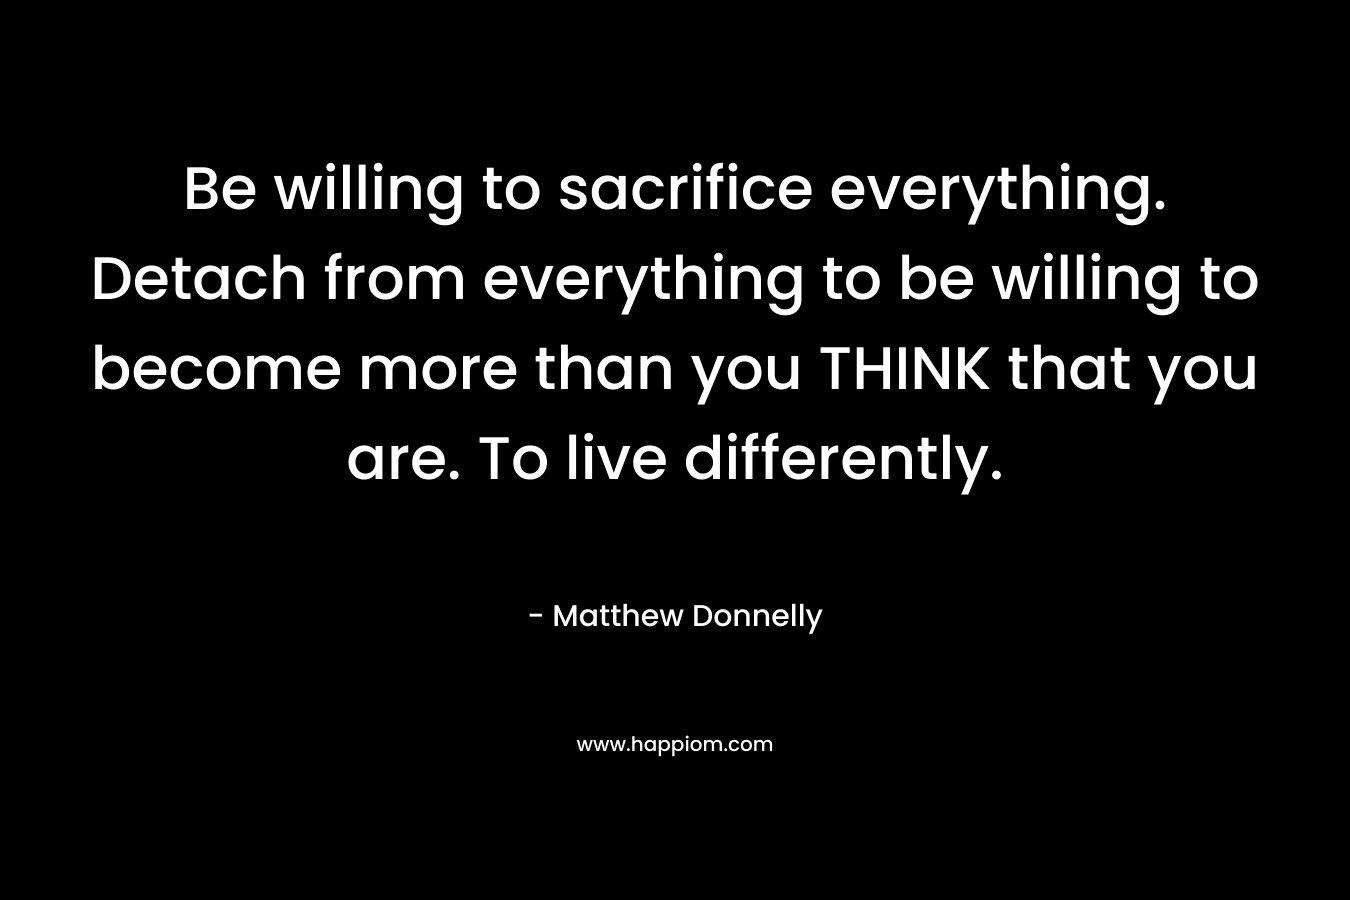 Be willing to sacrifice everything. Detach from everything to be willing to become more than you THINK that you are. To live differently.